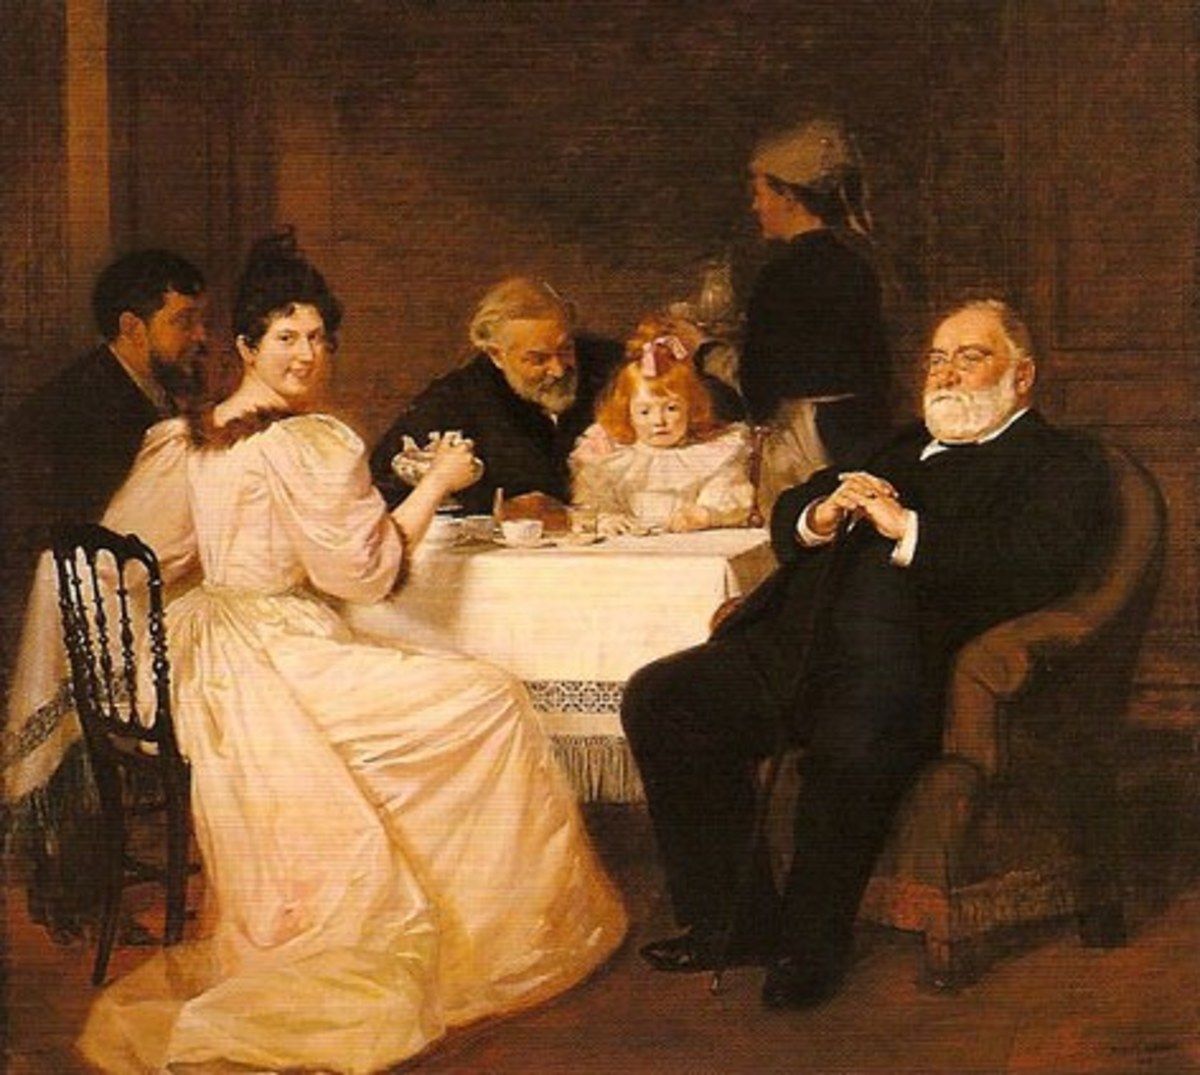 "A Gathering at the Home of Mme. Brisson", 1893 by Marcel André Bashet from Chairs: a History by Florence de Dampierre